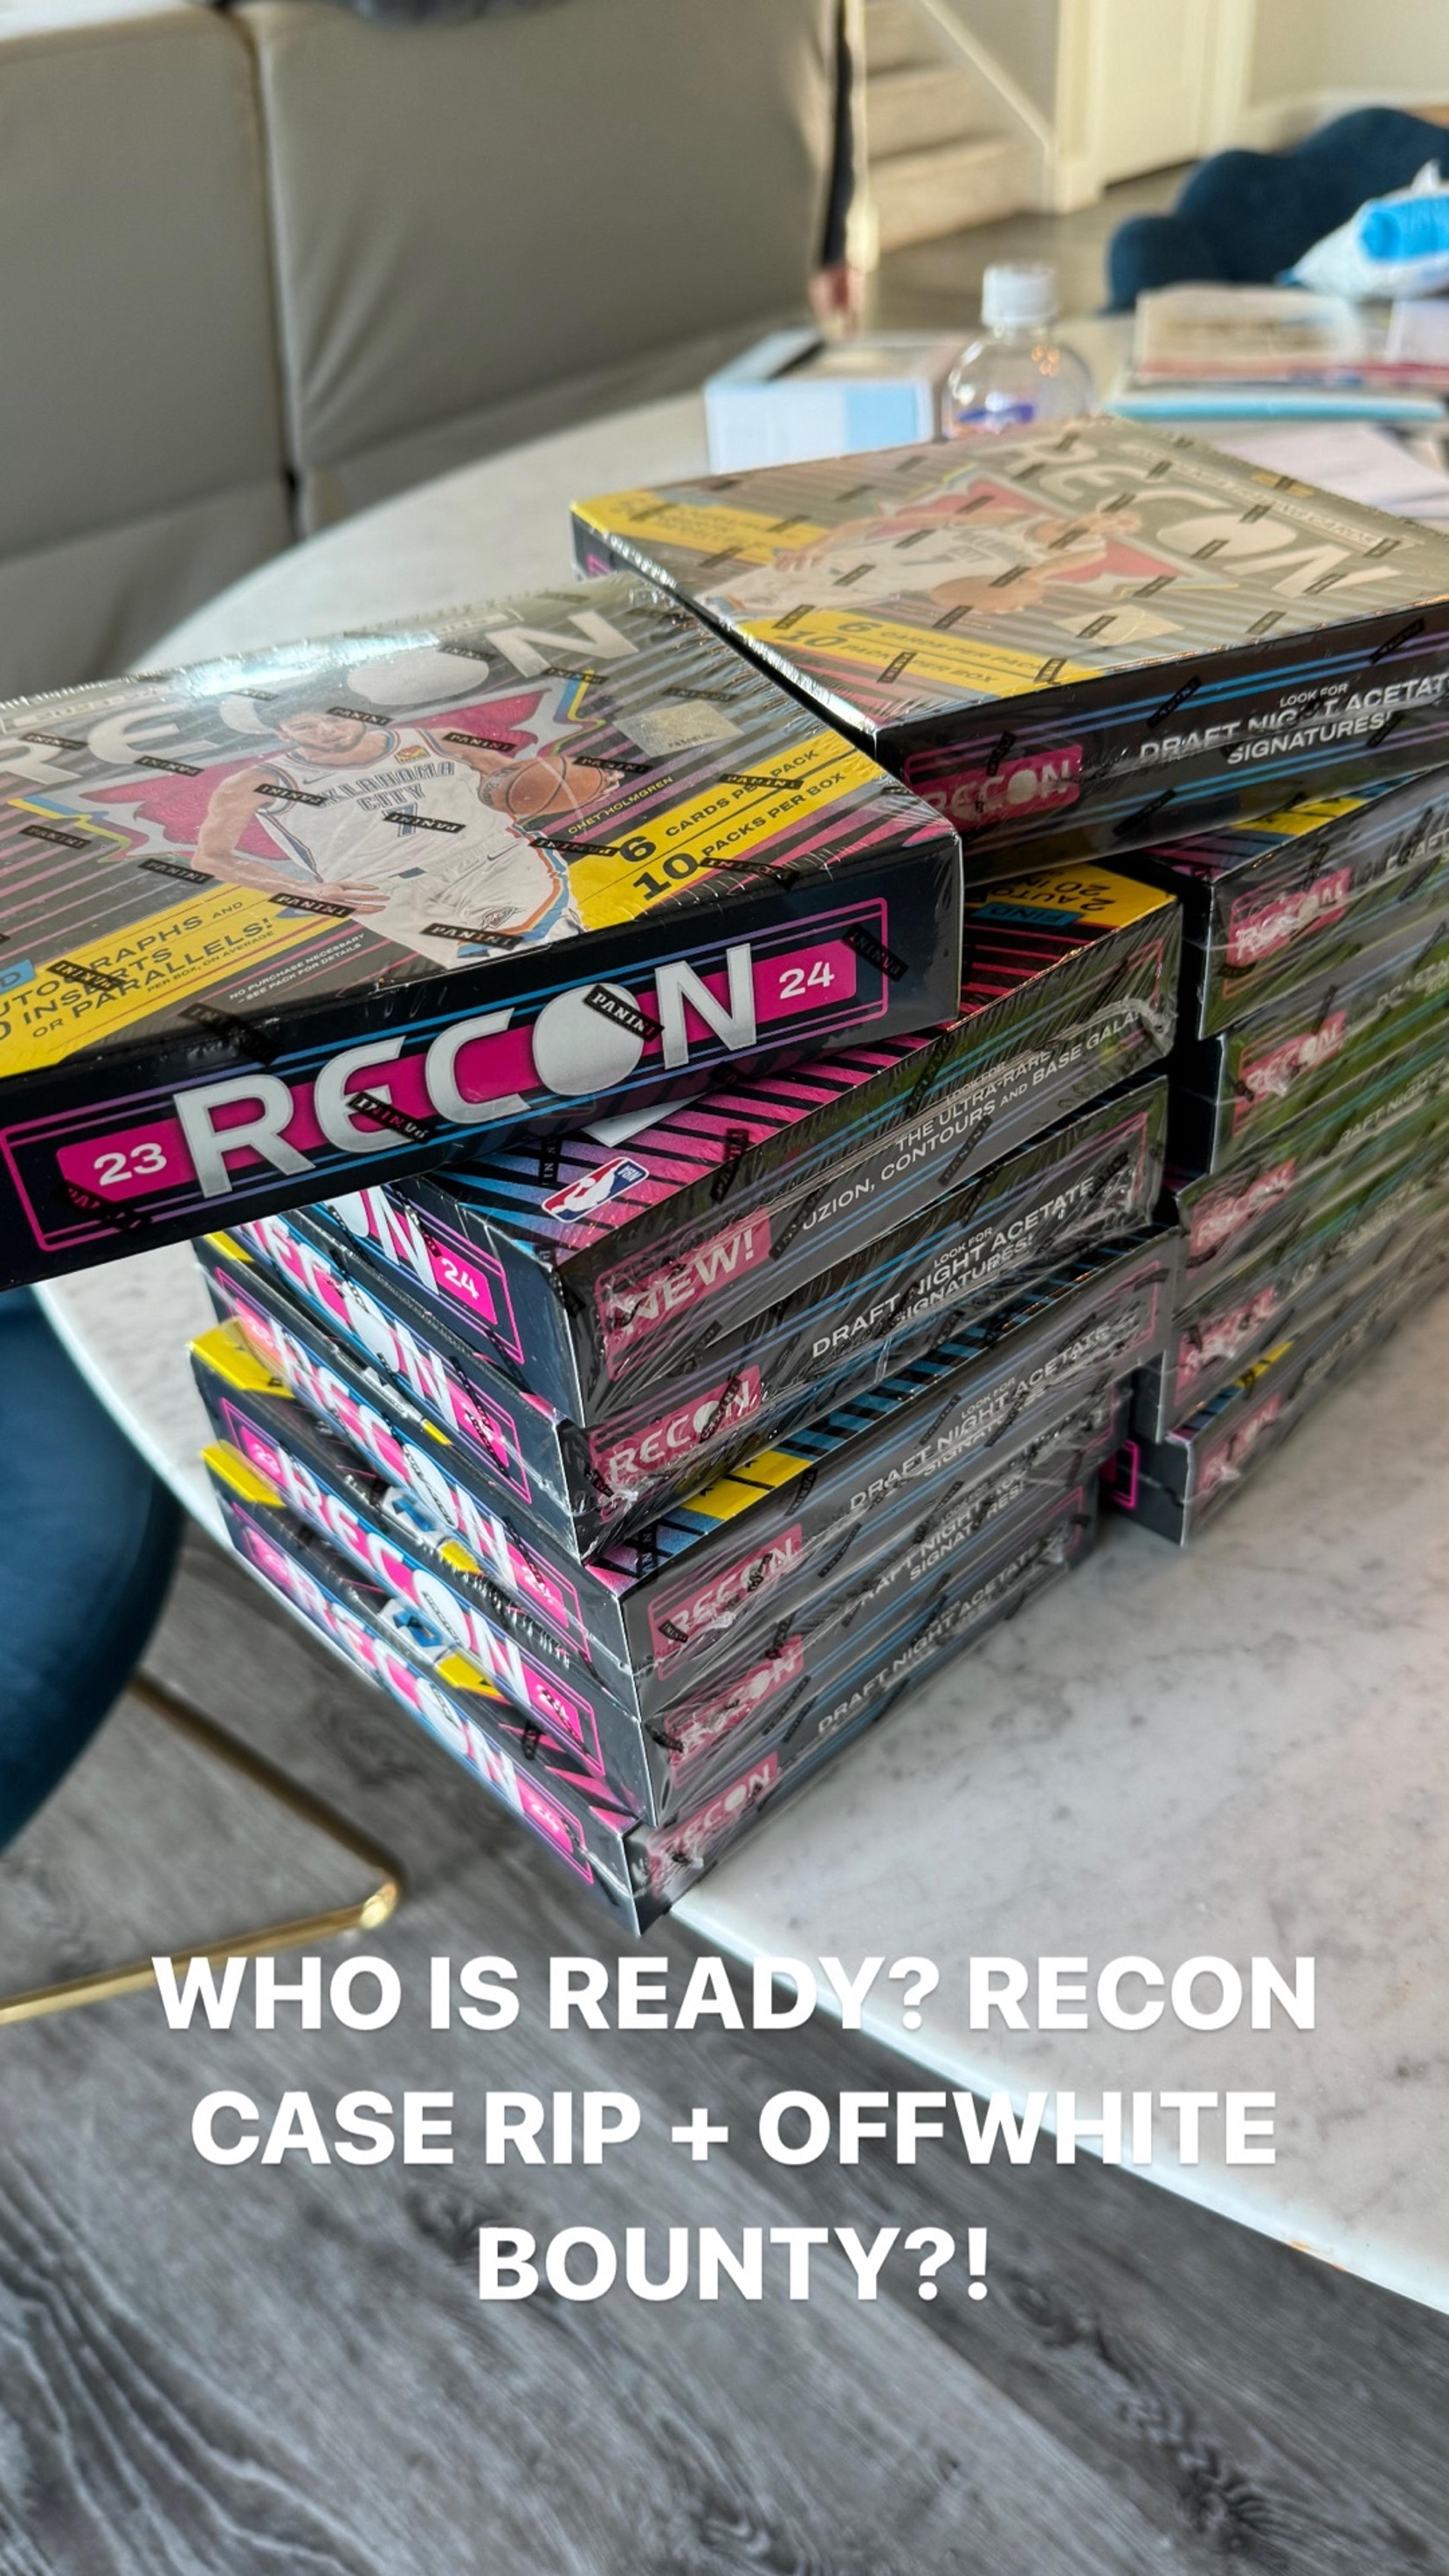 Preview image for the show titled "RECON CASE BREAK BOUNTY " at May 10, 2024